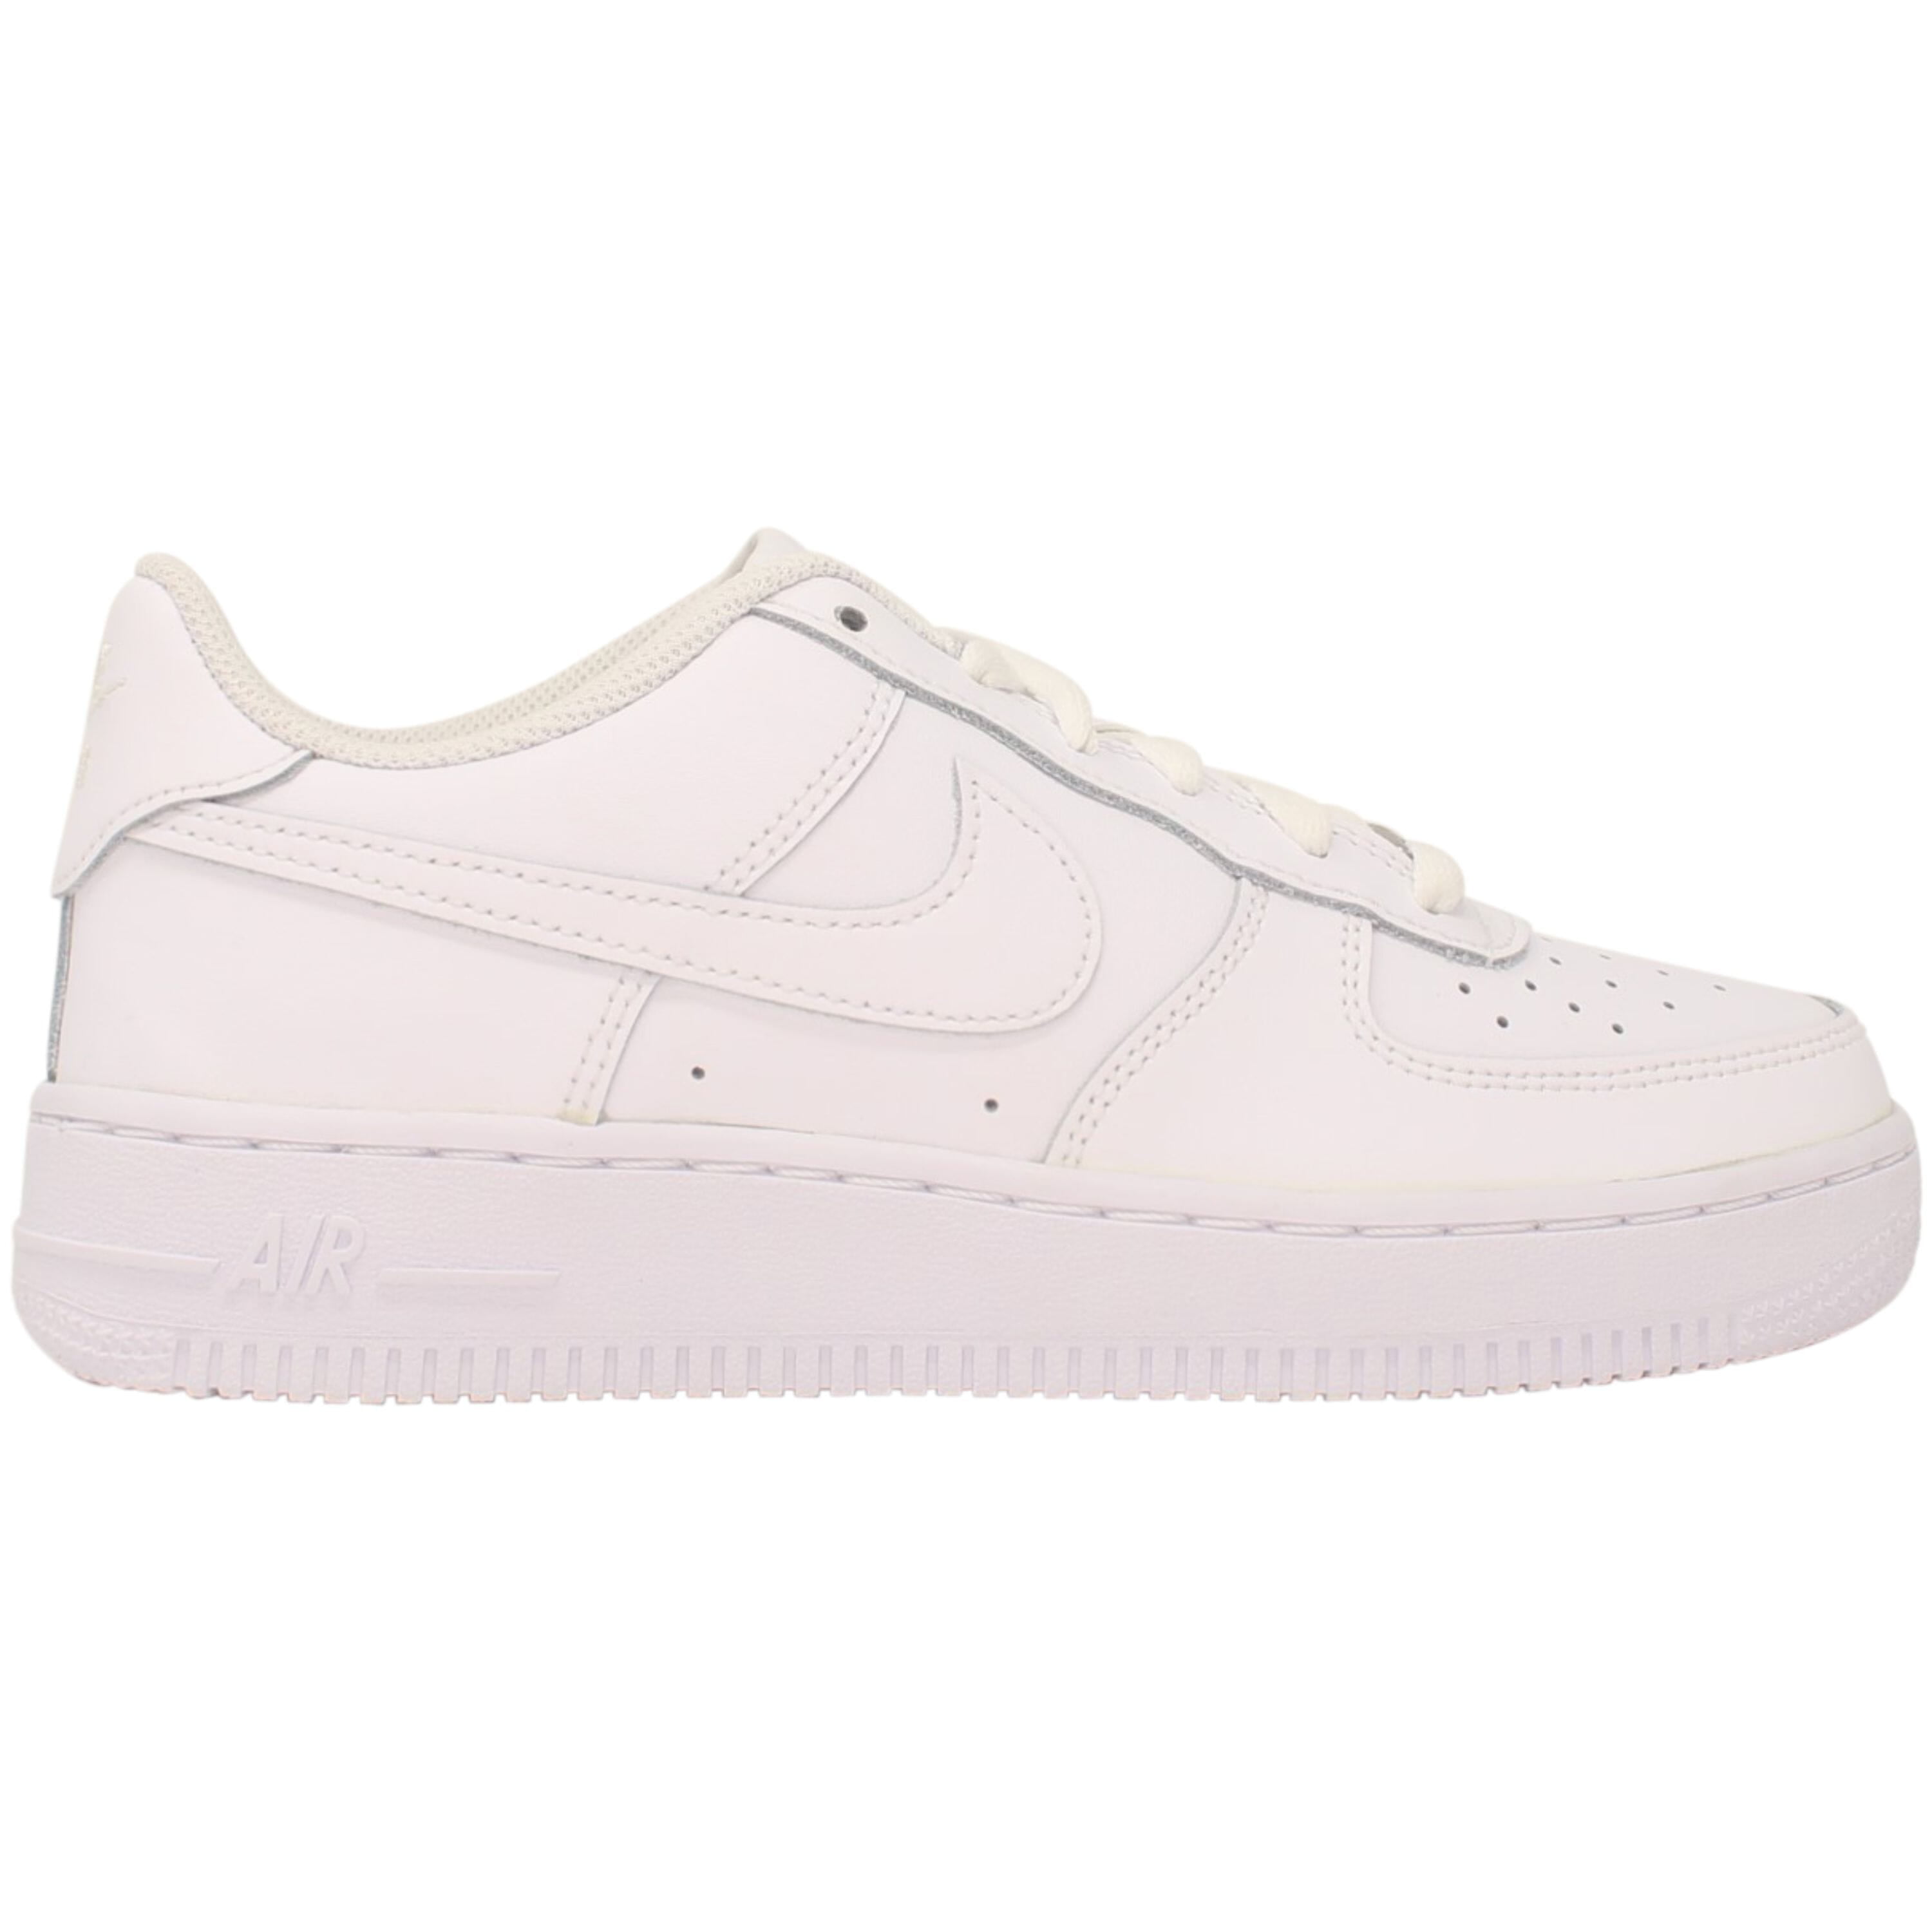 Nike Air Force 1 LE White/White DH2920-111 Grade-School Size 5Y